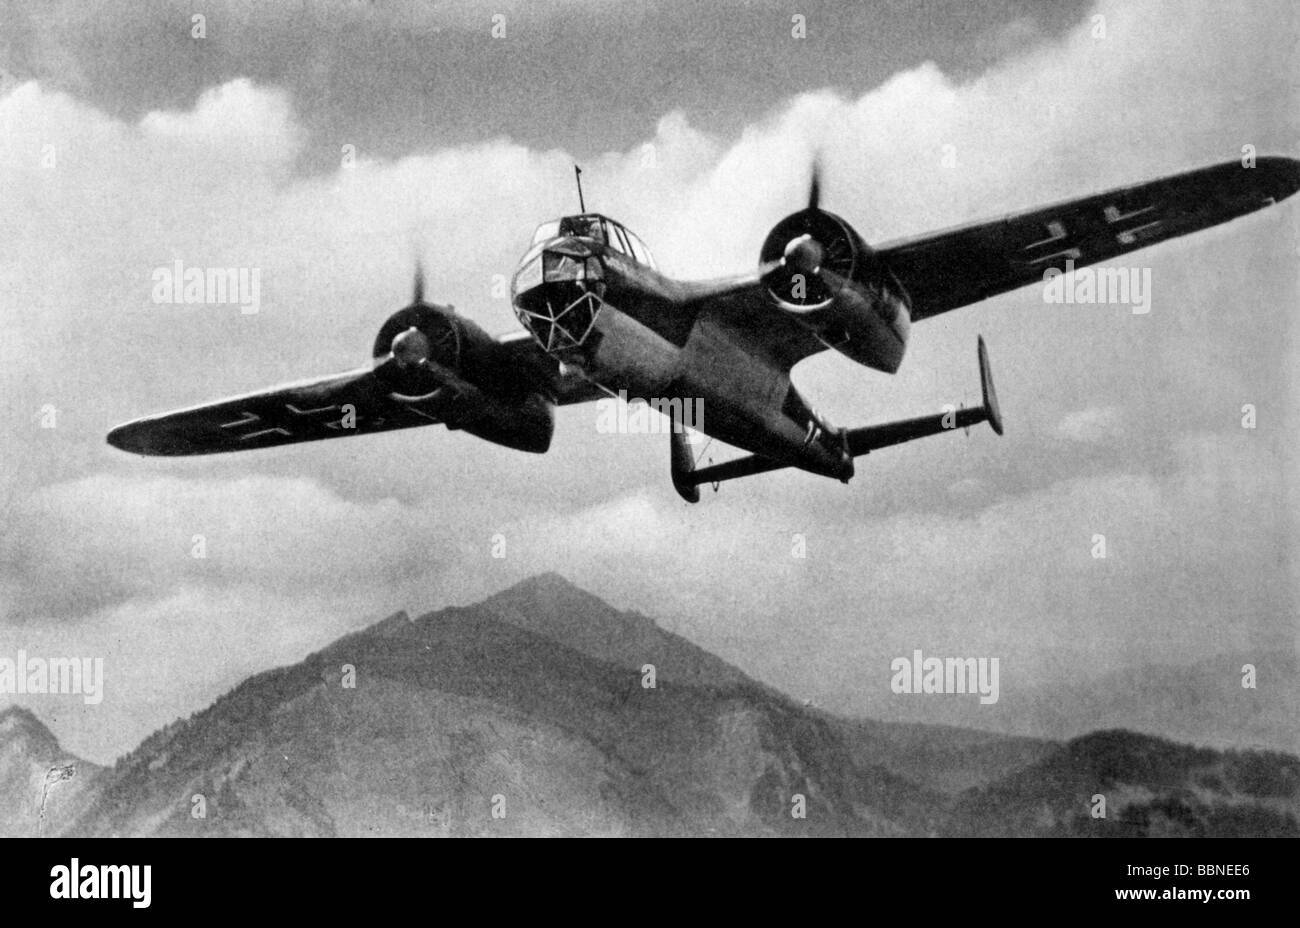 events, Second World War / WWII, aerial warfare, aircraft, German bomber Dornier Do 17 in flight, photo postcard, Germany, circa 1940, Do-17, Do17, Do 215, Do-215, Do215, bombers, flying, clouds, mountains, 20th century, historic, historical, Luftwaffe, Wehrmacht, Germany, Third Reich, plane, planes, postcards, 1940s, Stock Photo